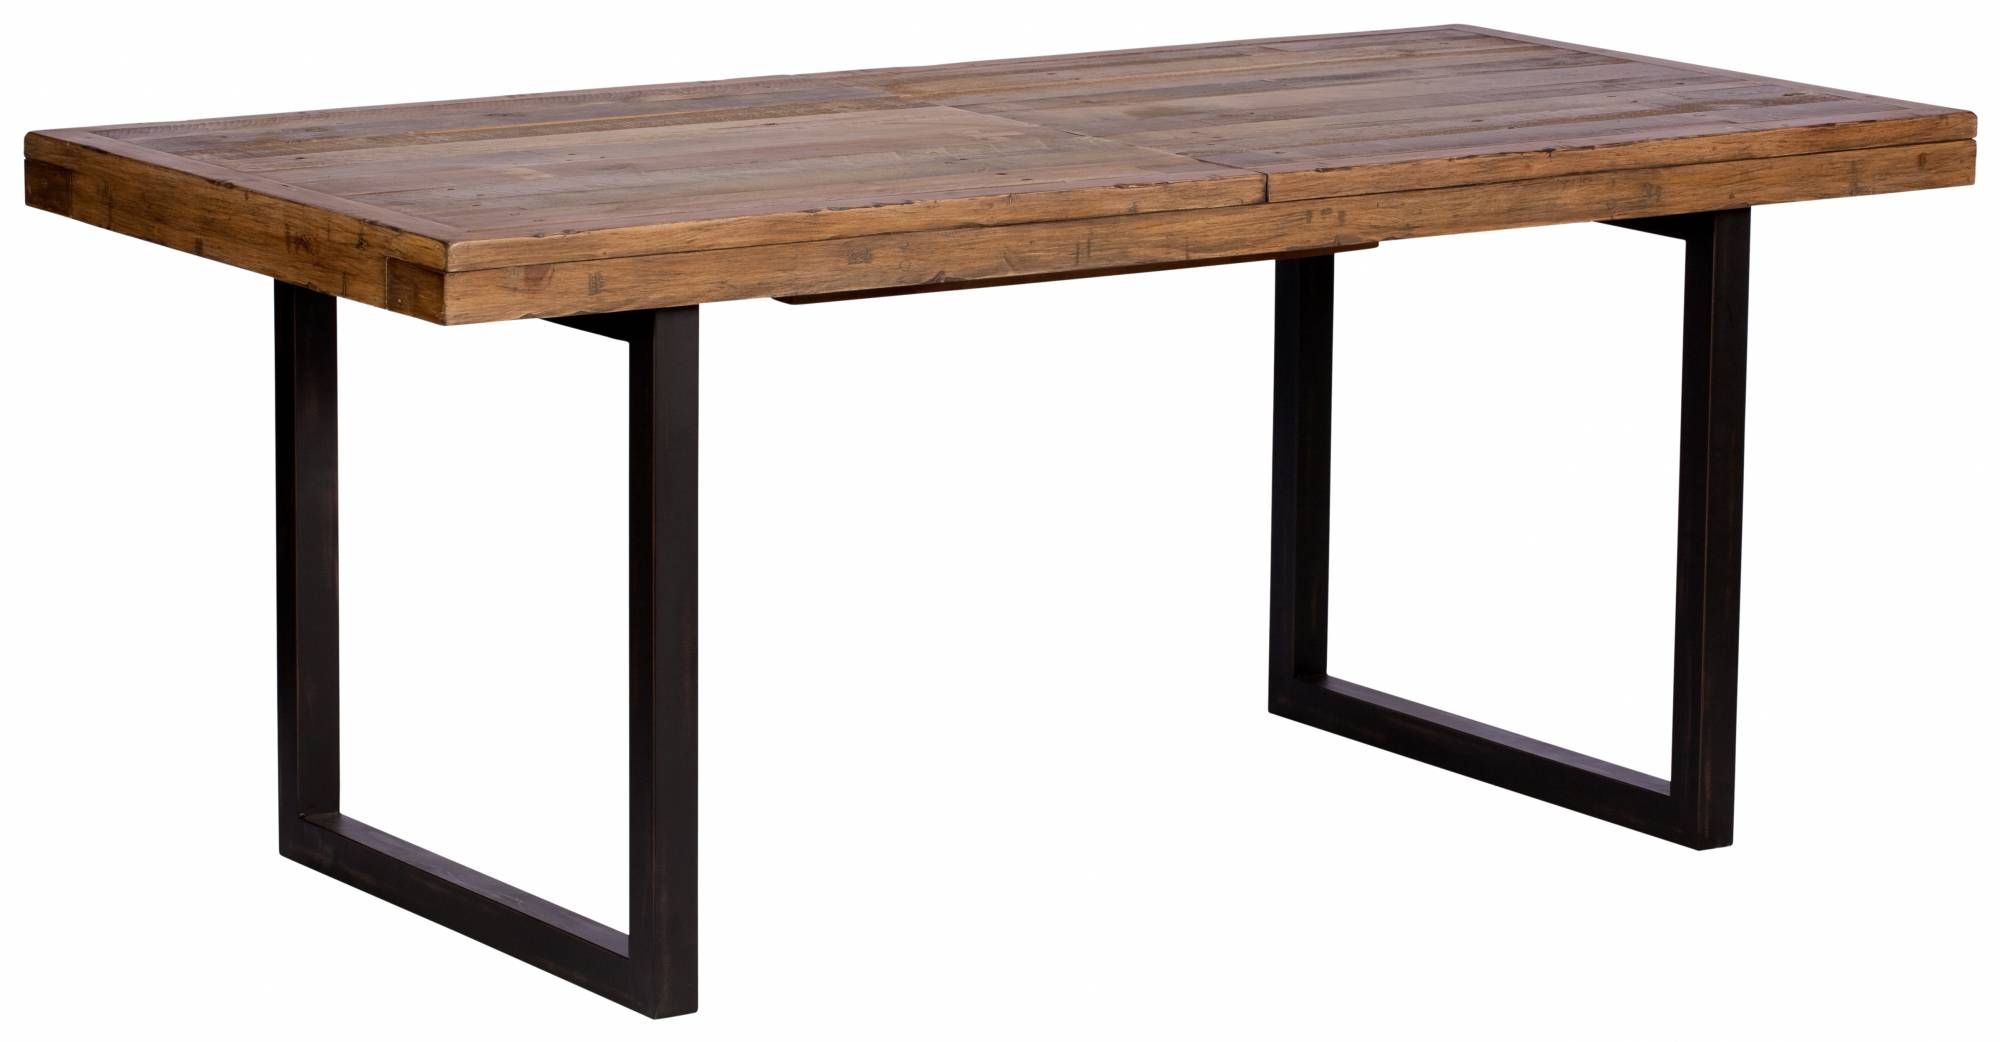 Hardware – New 140cm Extending Dining Table Intended For 2017 Small Rustic Look Dining Tables (View 19 of 30)